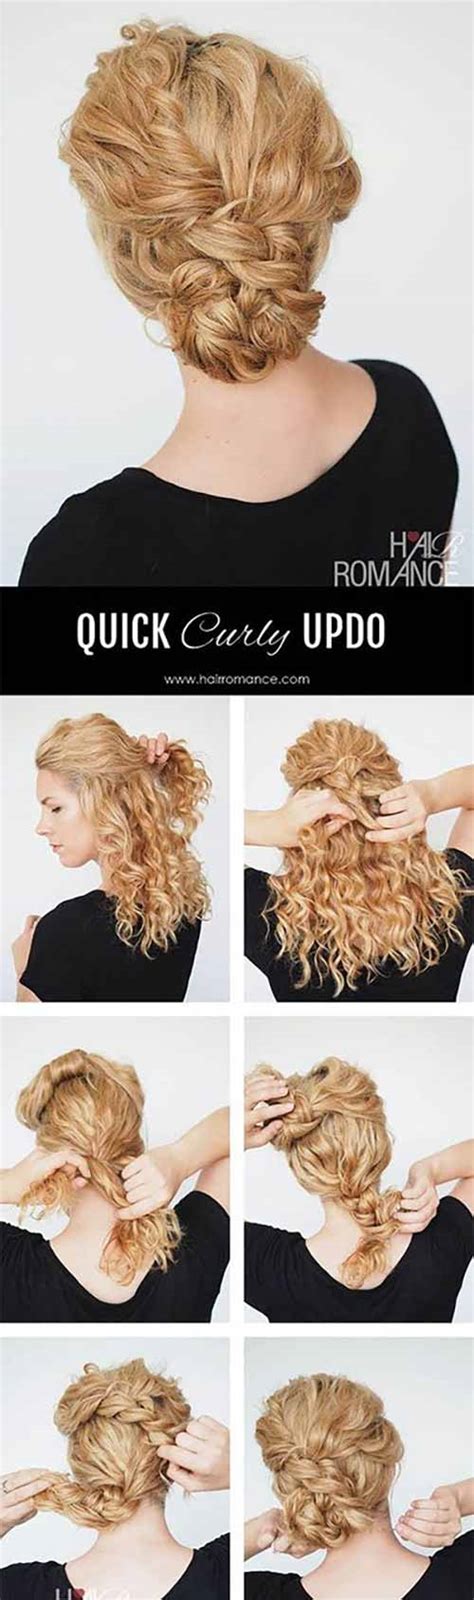 25 incredibly stunning diy updos for curly hair